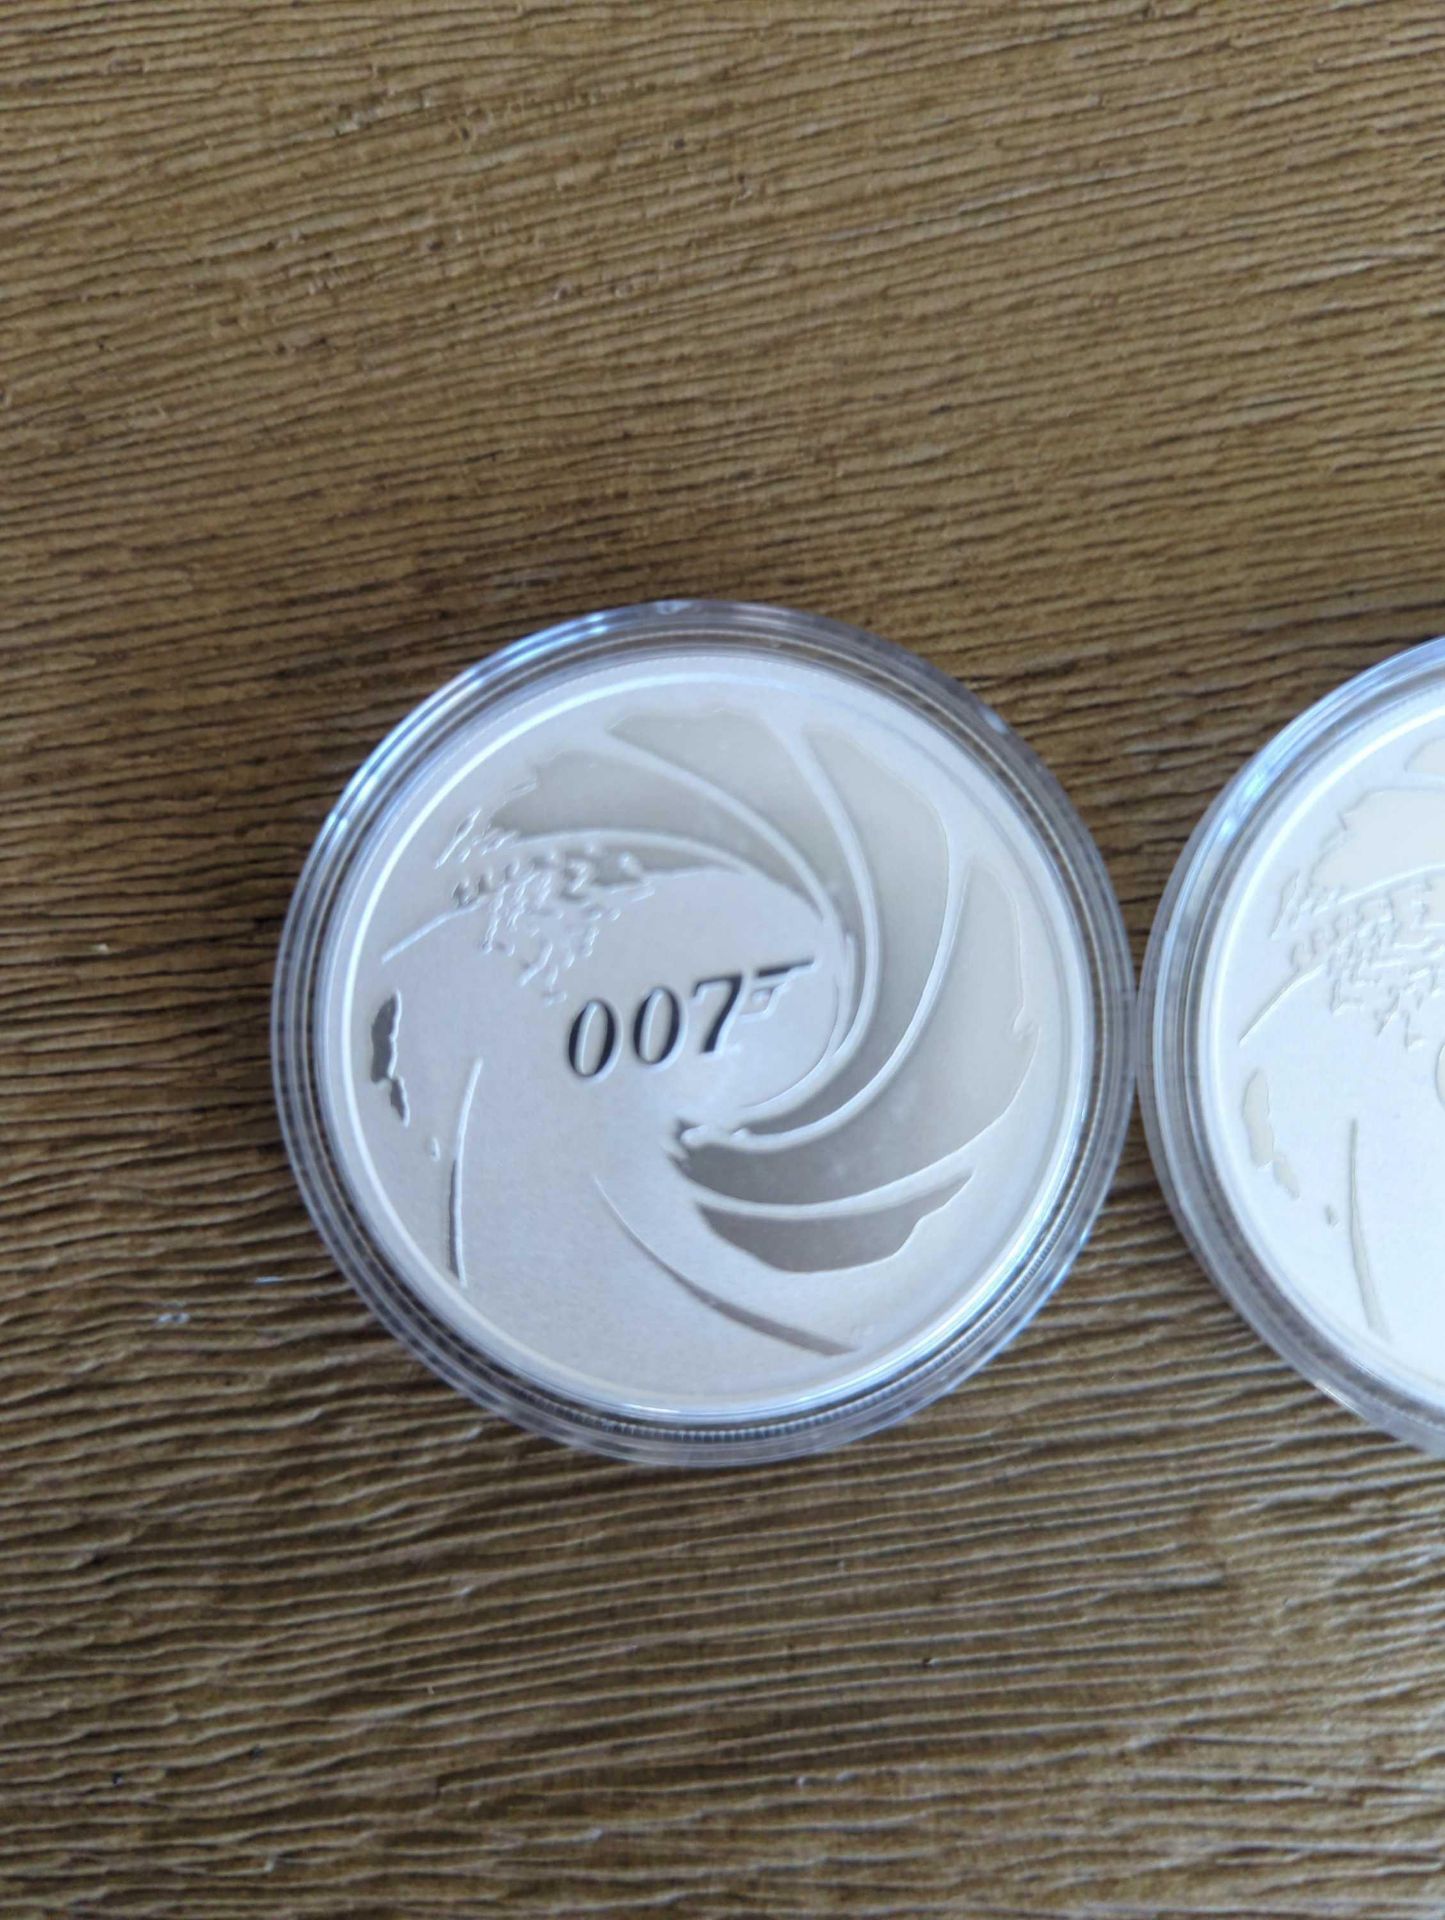 2 007 Coins - Image 2 of 4